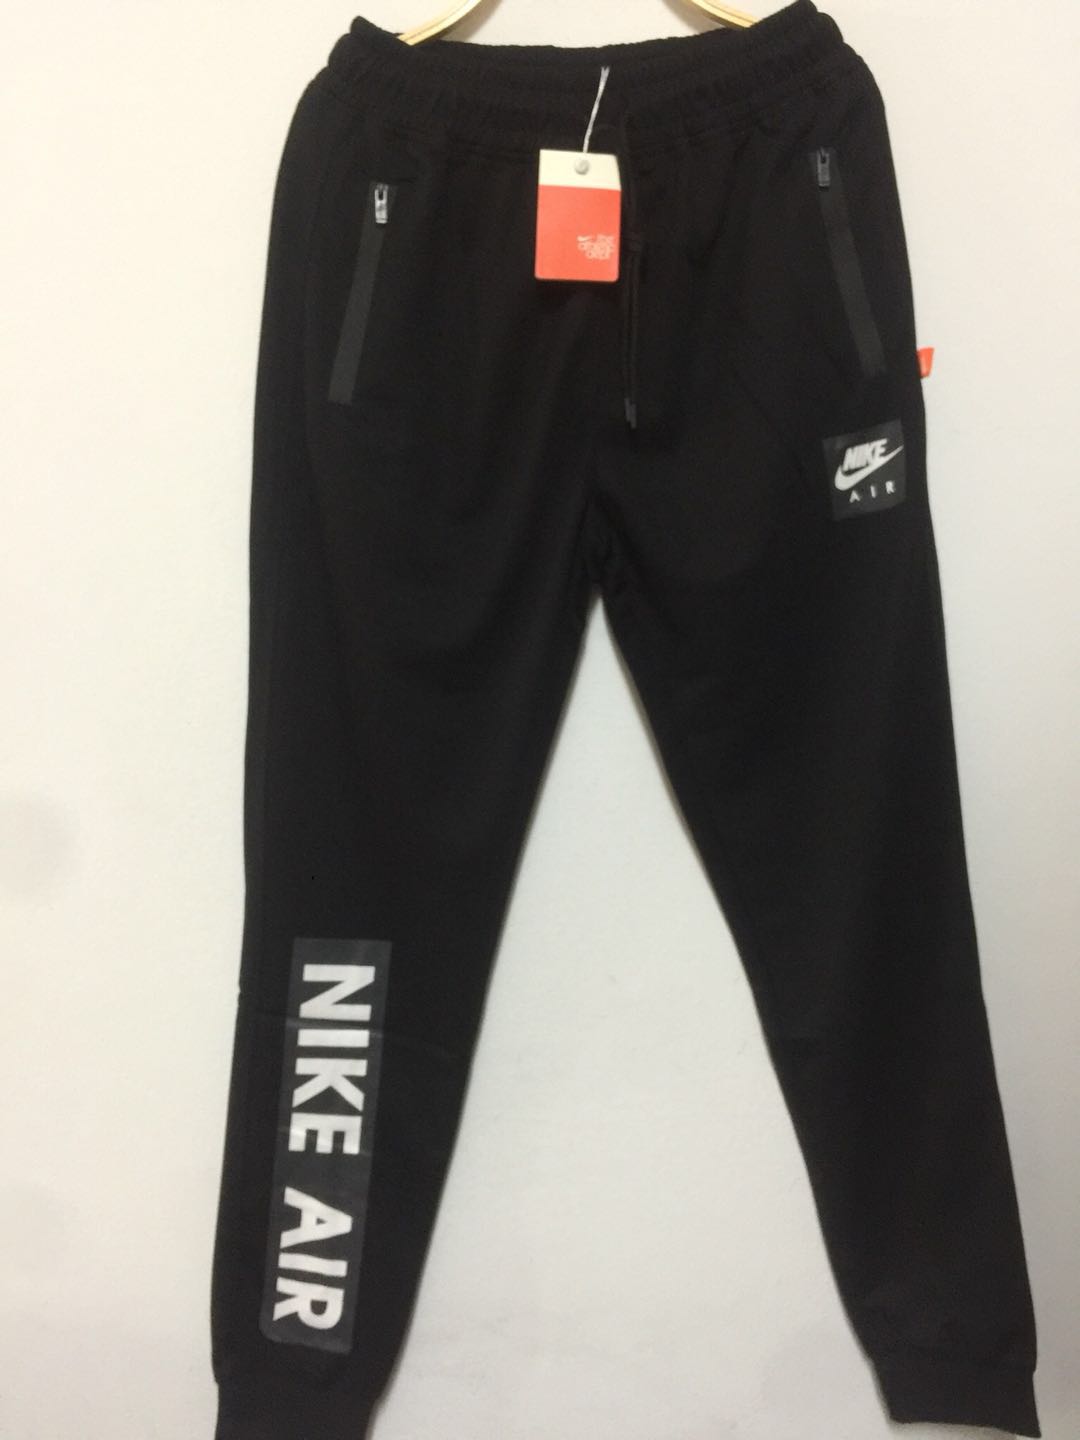 Nike men's pants new running training and fitness pants in autumn wear-resistant comfortable casual knitting closed leg pants